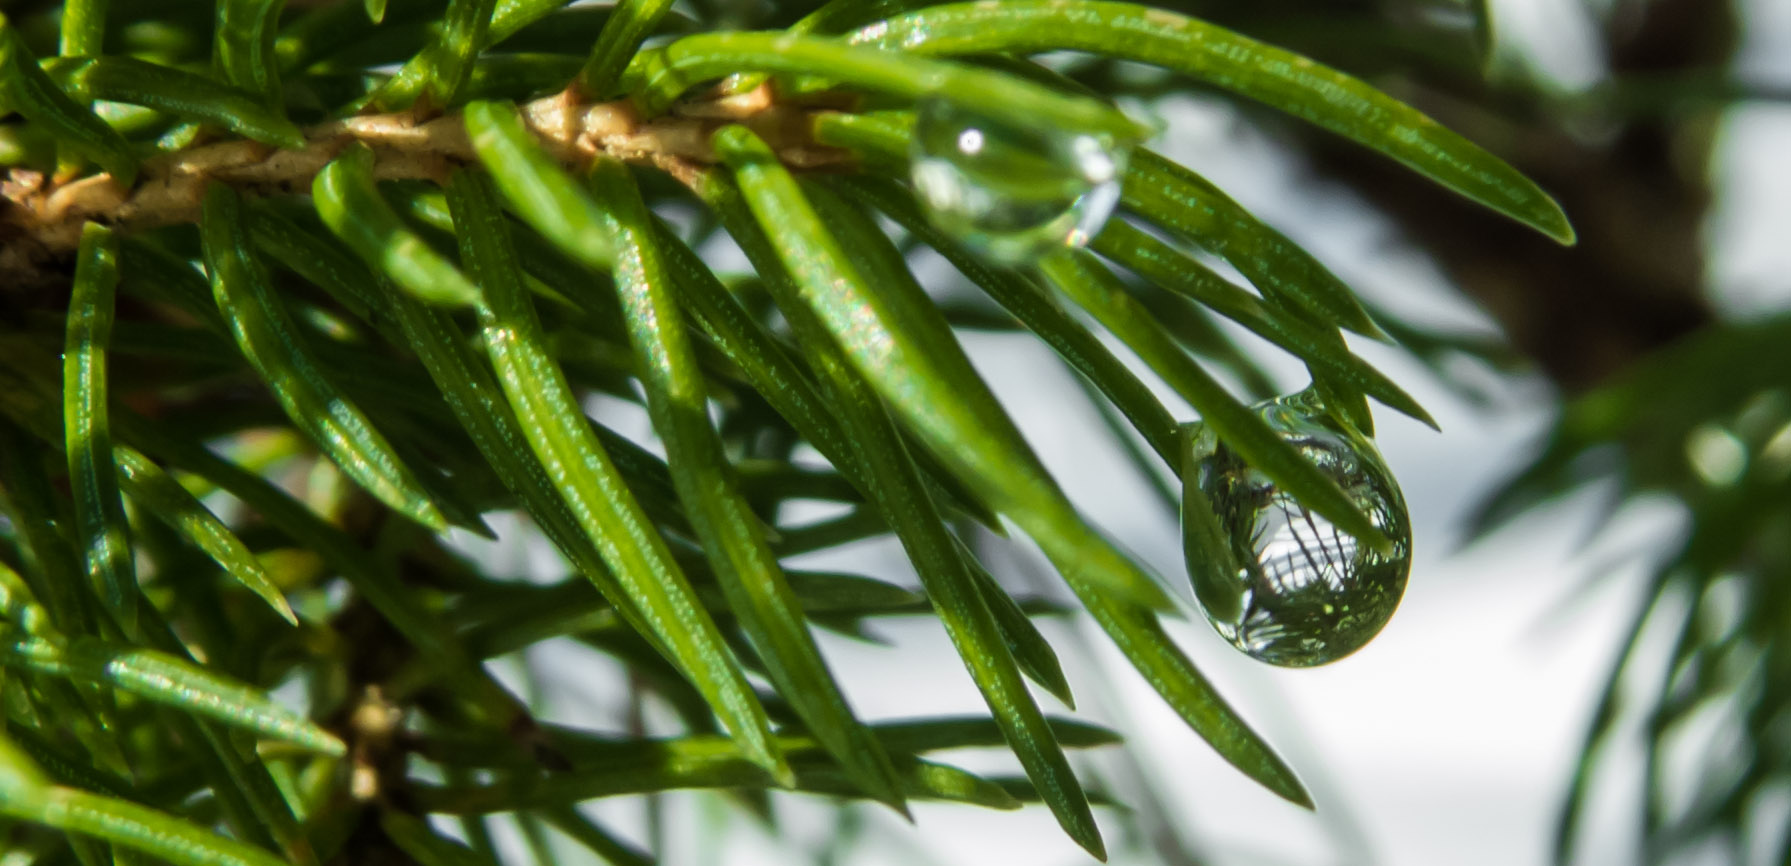 Juniper plant with small water drops photo